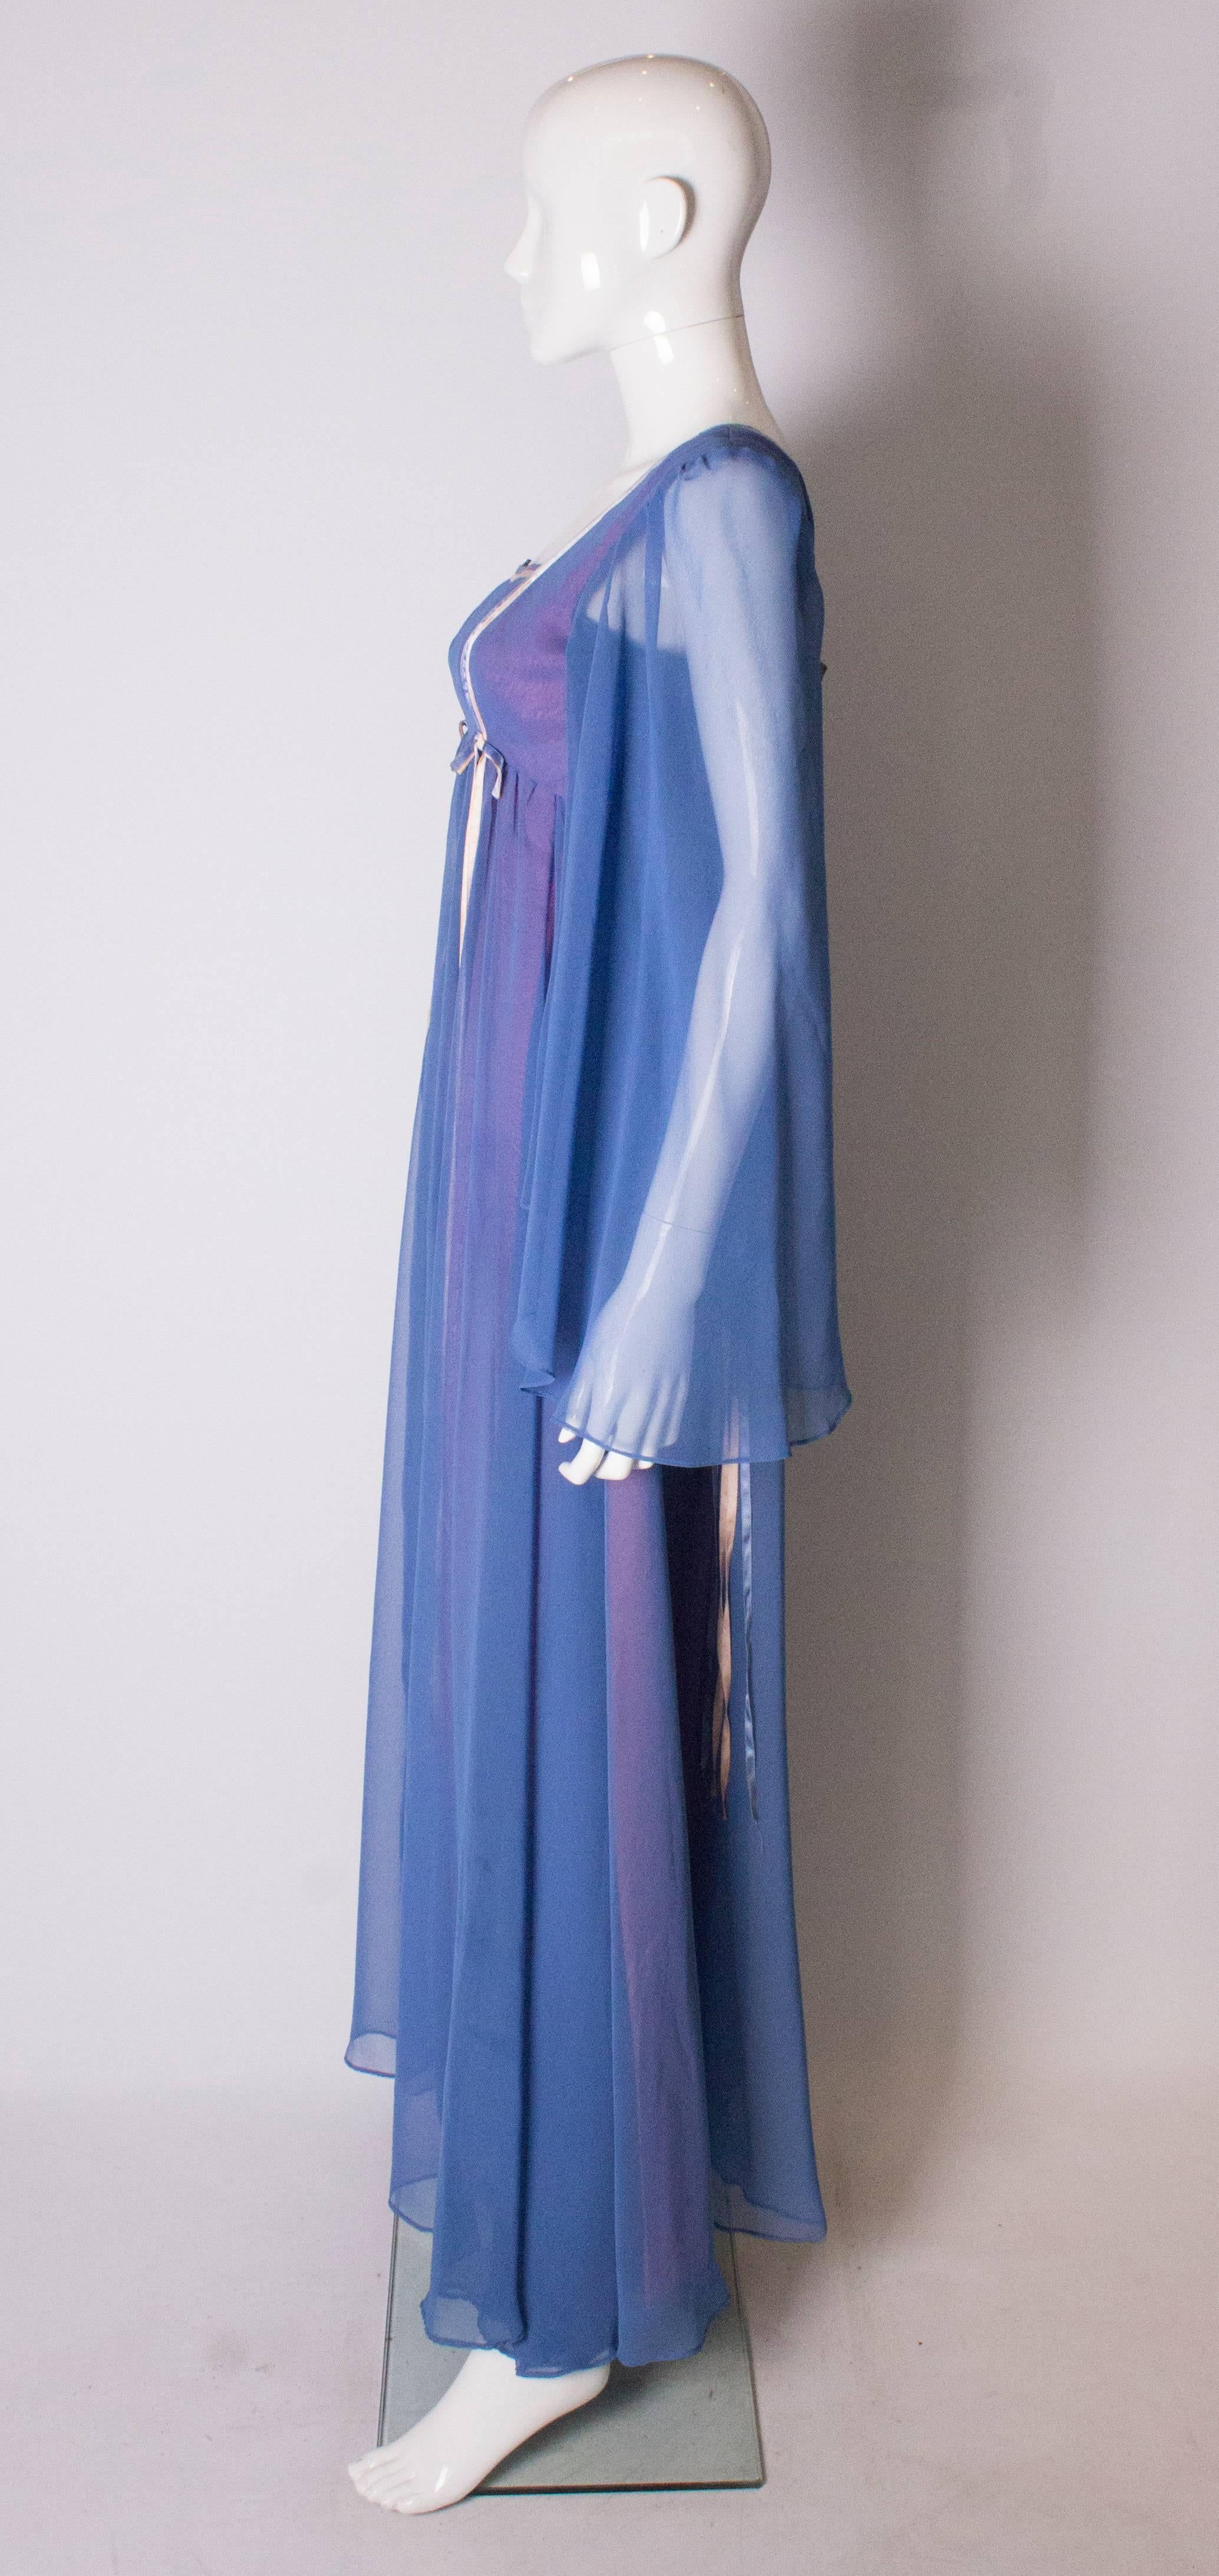 padme nightgown costume